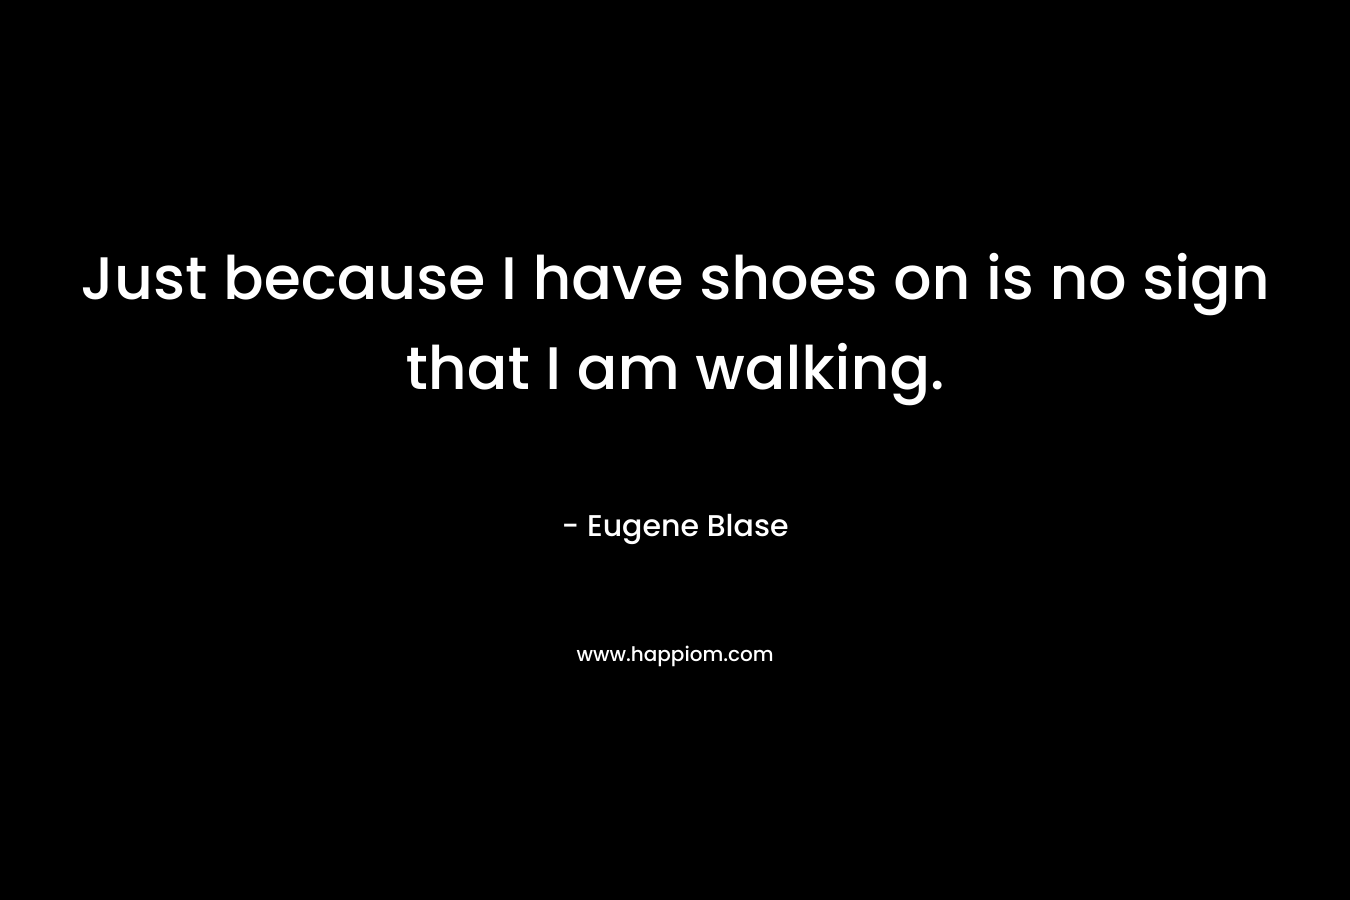 Just because I have shoes on is no sign that I am walking.